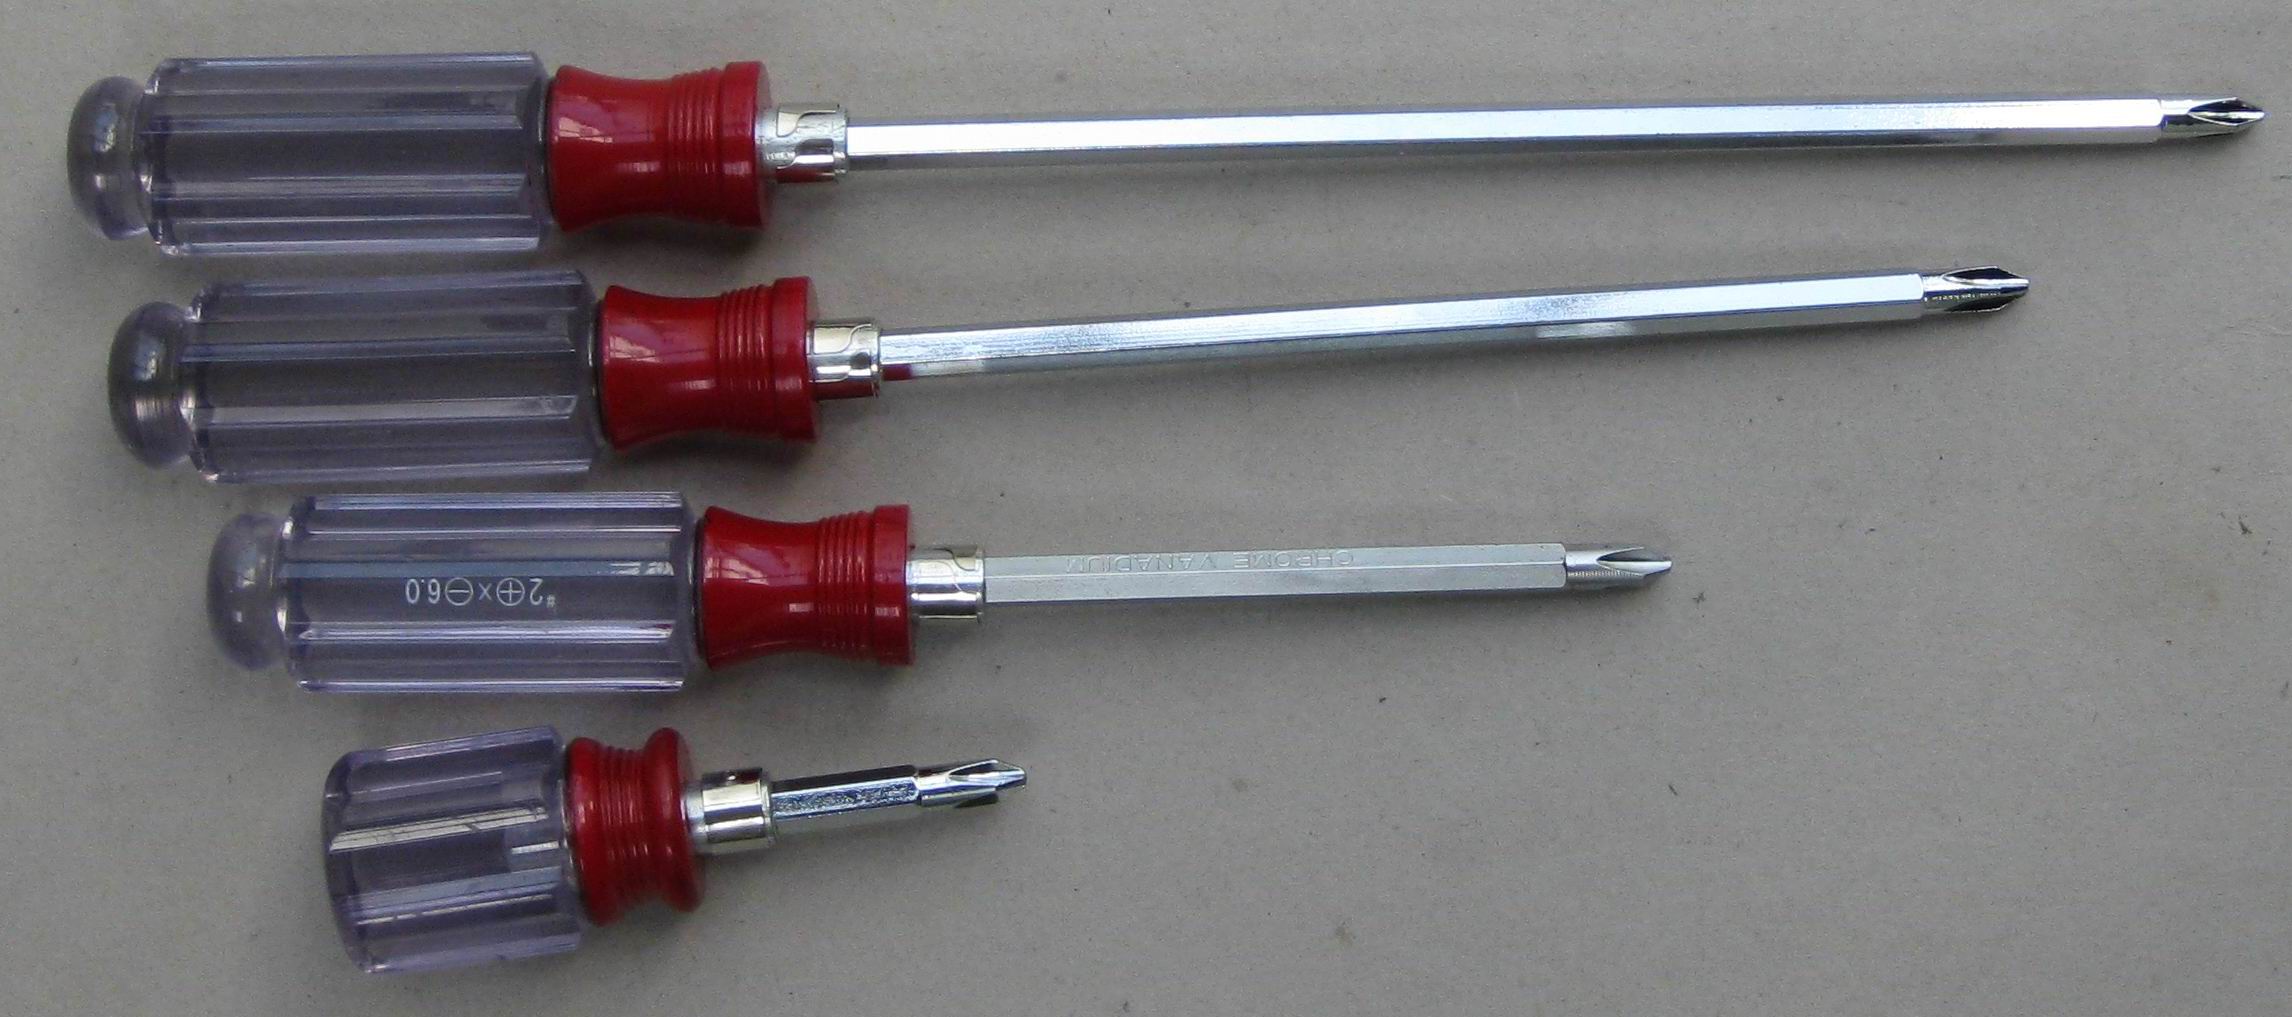 2 way Screwdriver with PVC Handle (P9806)